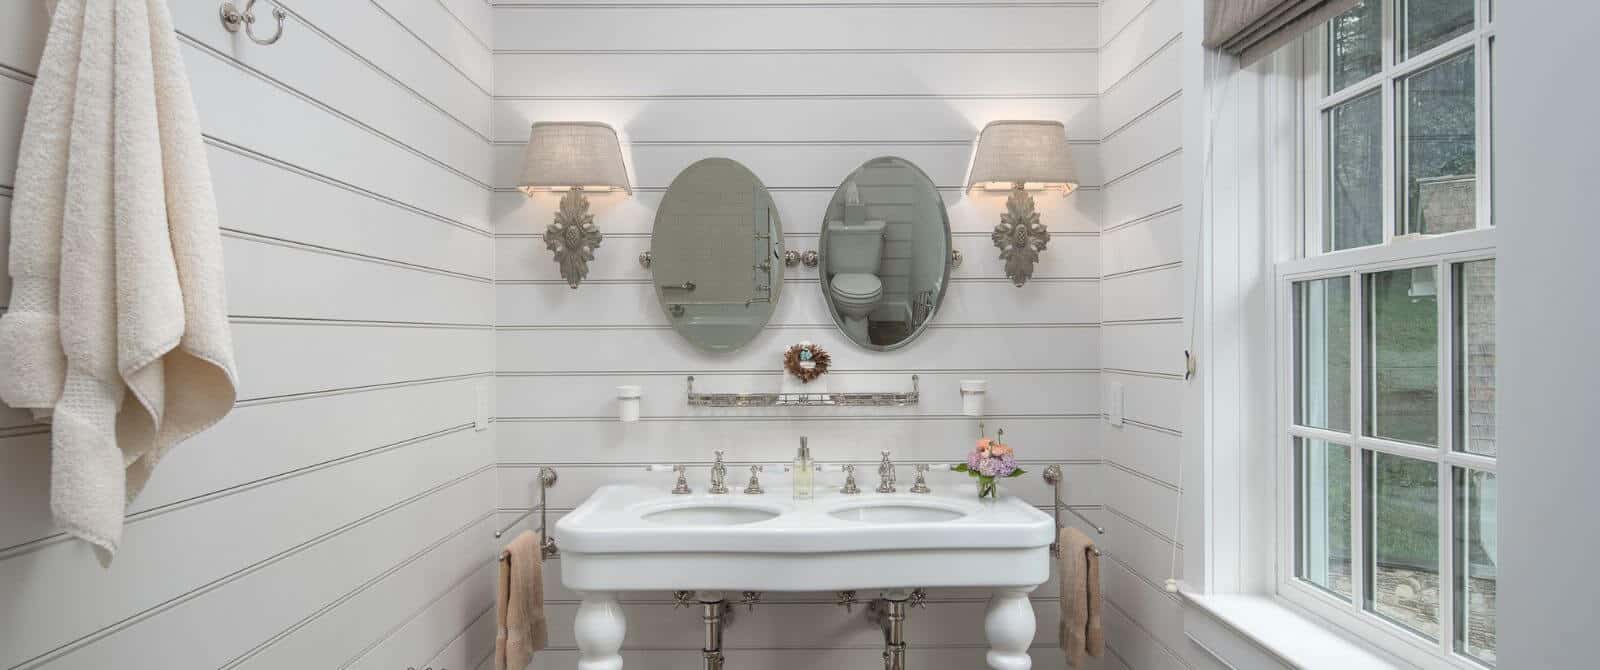 Bathroom with double bowl pedestal sink, two oval mirrors, lamp sconces and a bright window